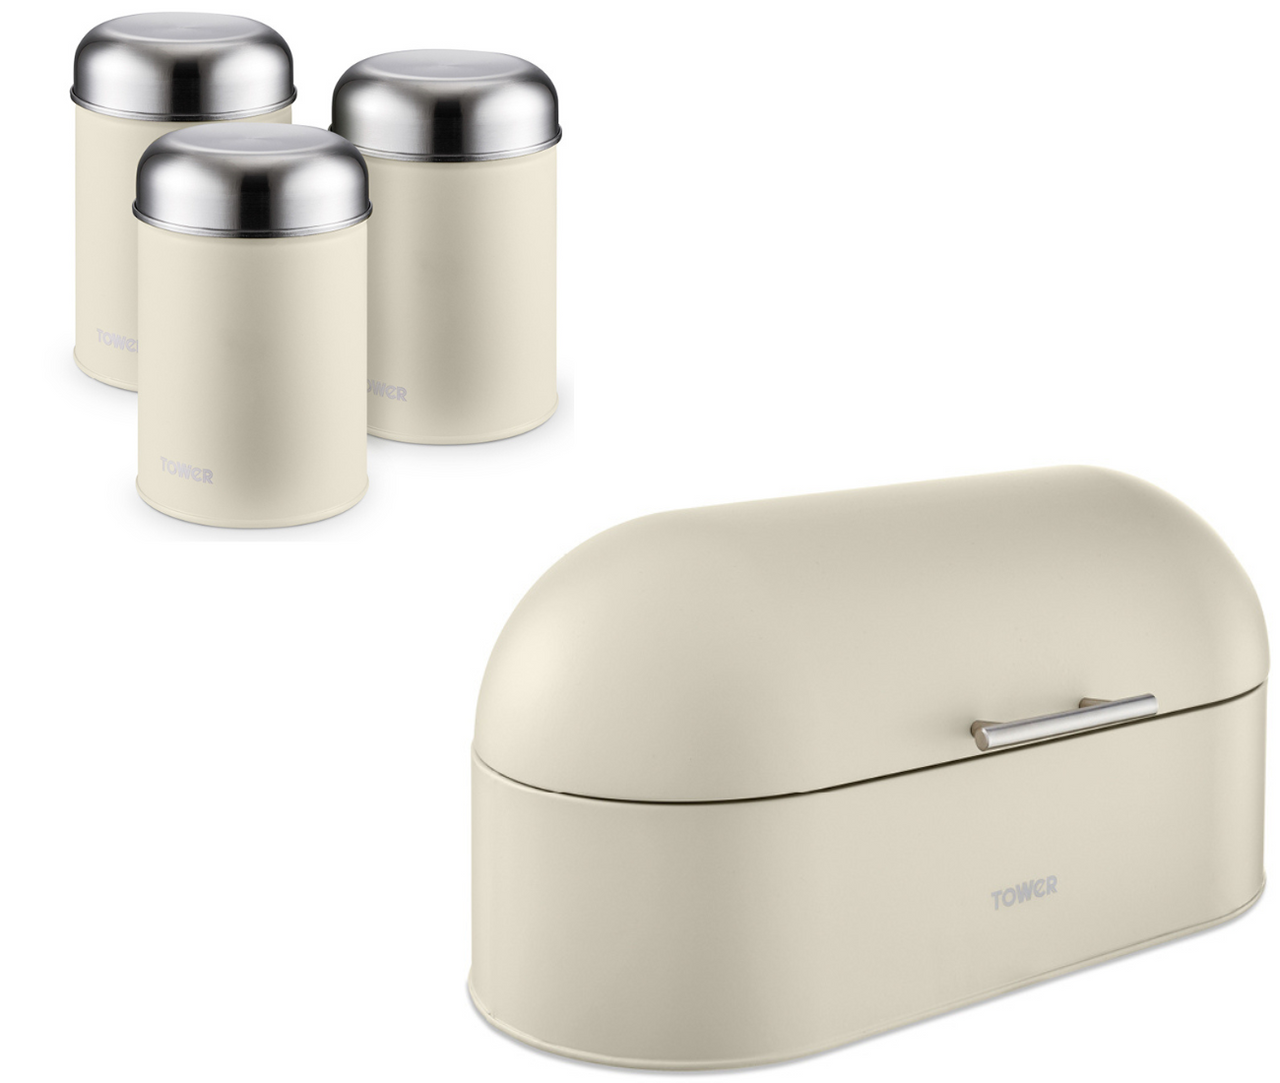 Tower Infinity Bread Bin & 3 Canisters Matching Kitchen Storage Set in Pebble